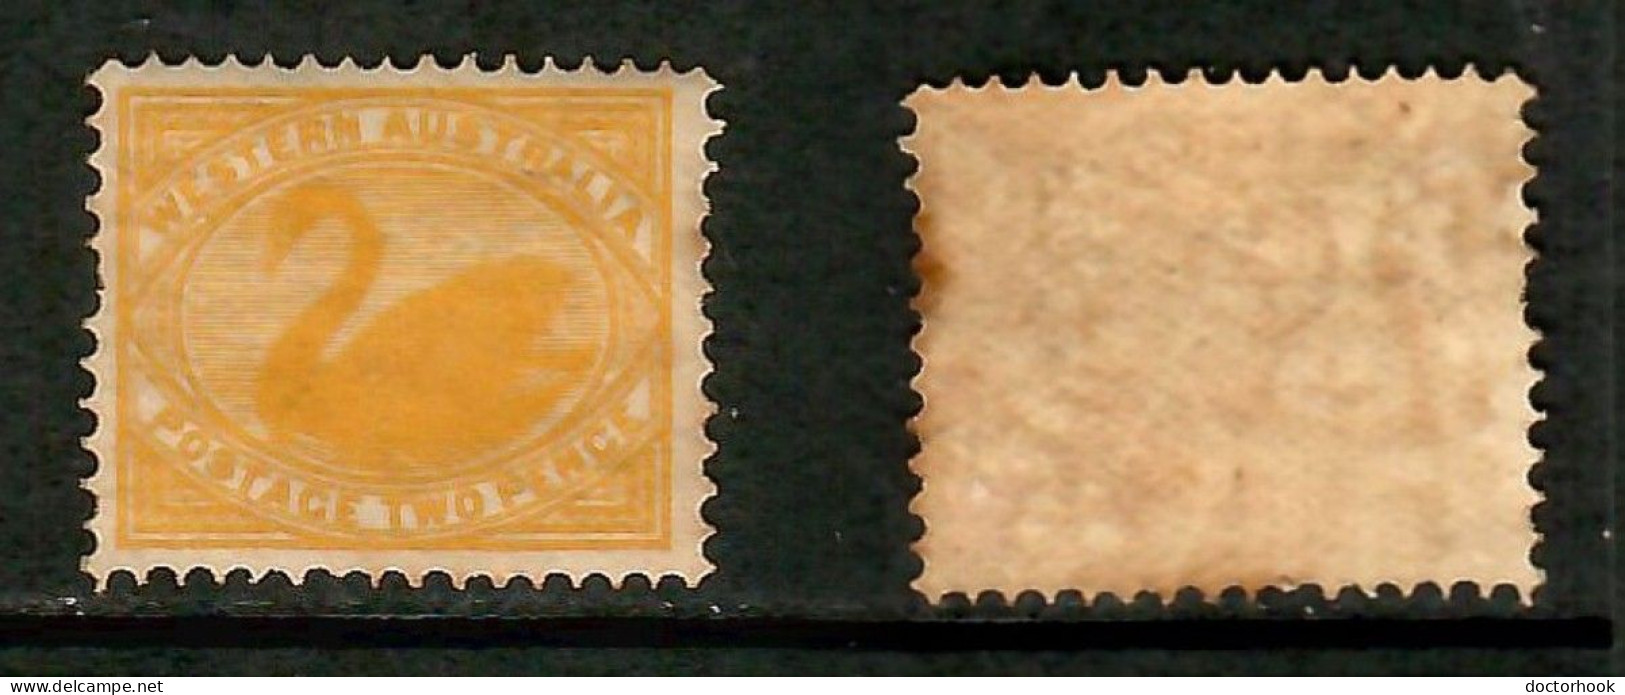 WESTERN AUSTRALIA   Scott # 77* MINT LH (1 Short Perf On Left Side) (CONDITION AS PER SCAN) (Stamp Scan # 1009-8) - Neufs